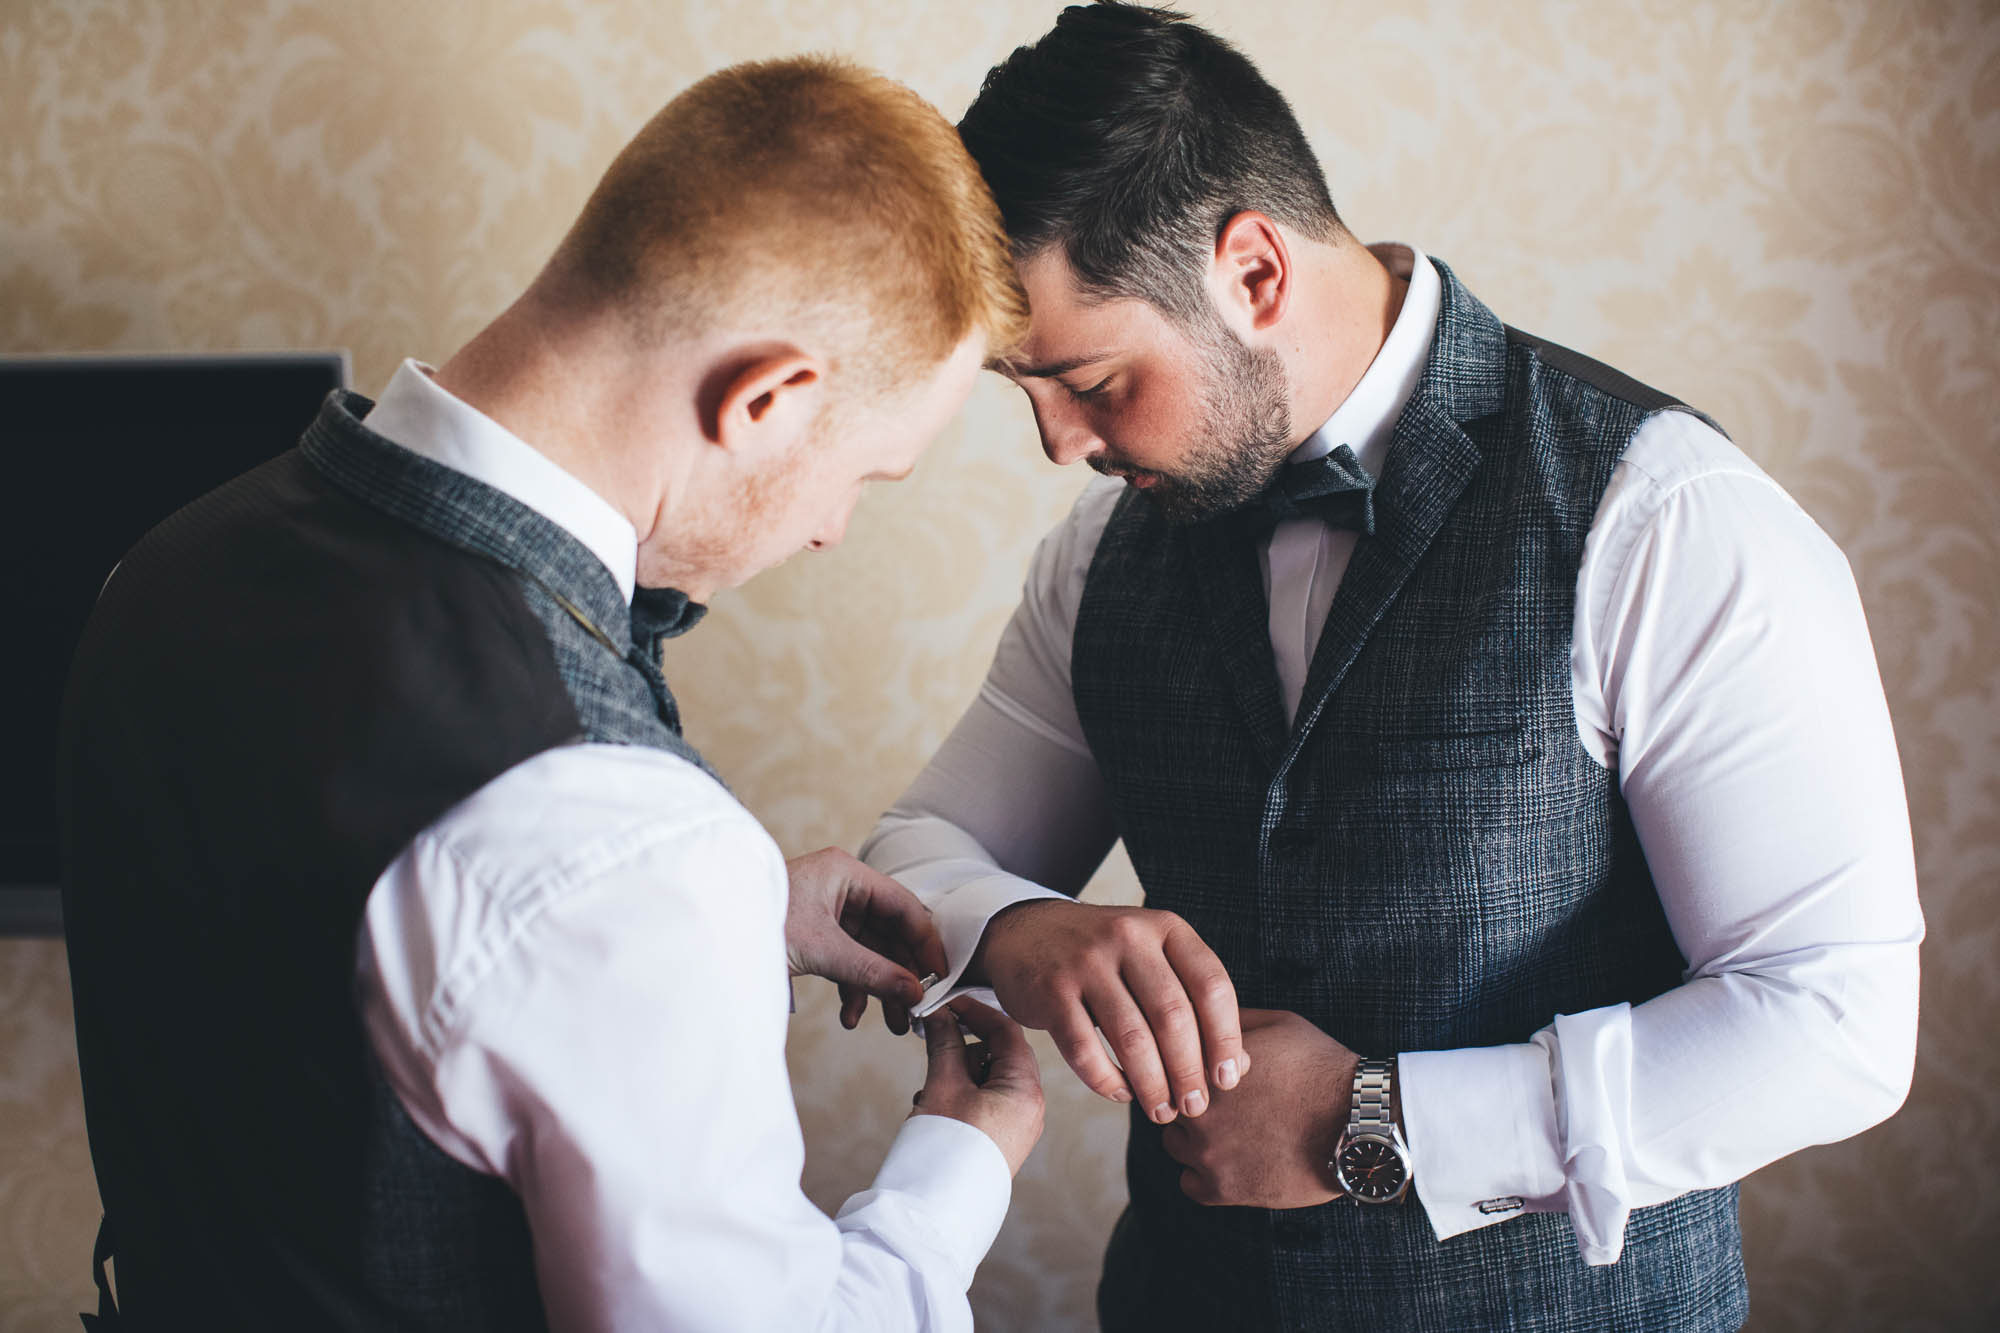 Groomsman helps Groom with his cuff-links on morning of wedding